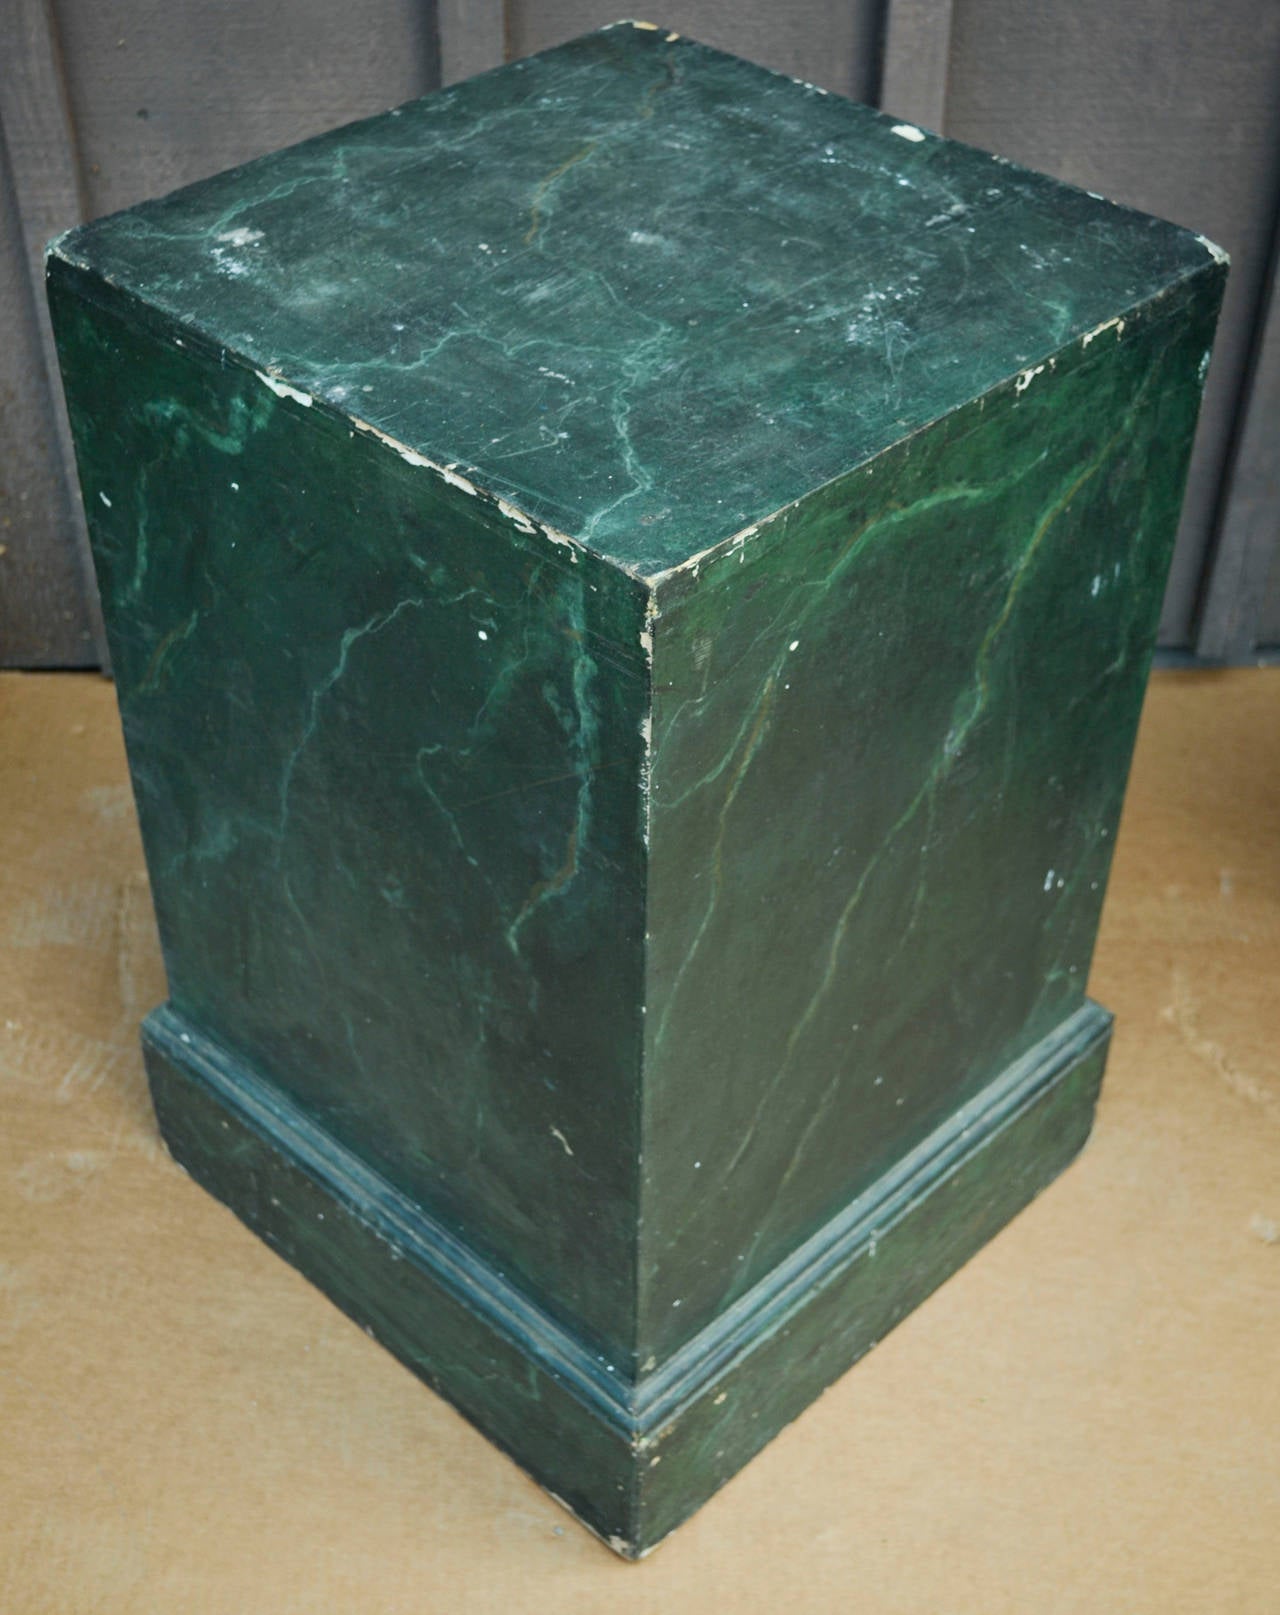 Pair of vintage wooden pedestals painted to resemble malachite, c. early 20th century. 

Some chips and signs of wear; please inquire review images for details. 